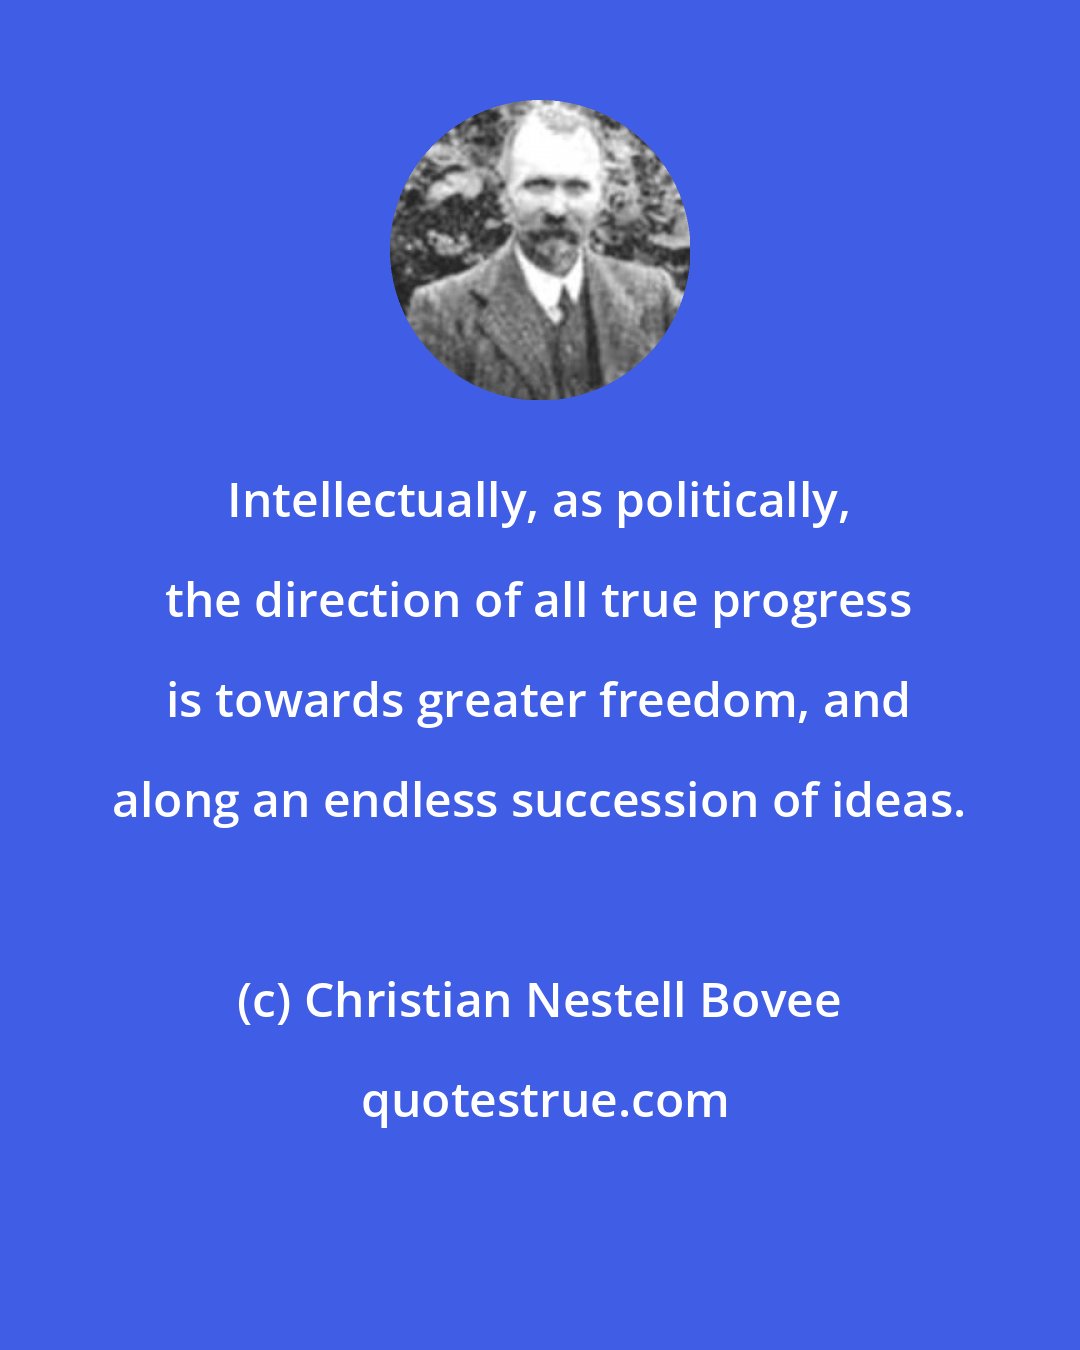 Christian Nestell Bovee: Intellectually, as politically, the direction of all true progress is towards greater freedom, and along an endless succession of ideas.